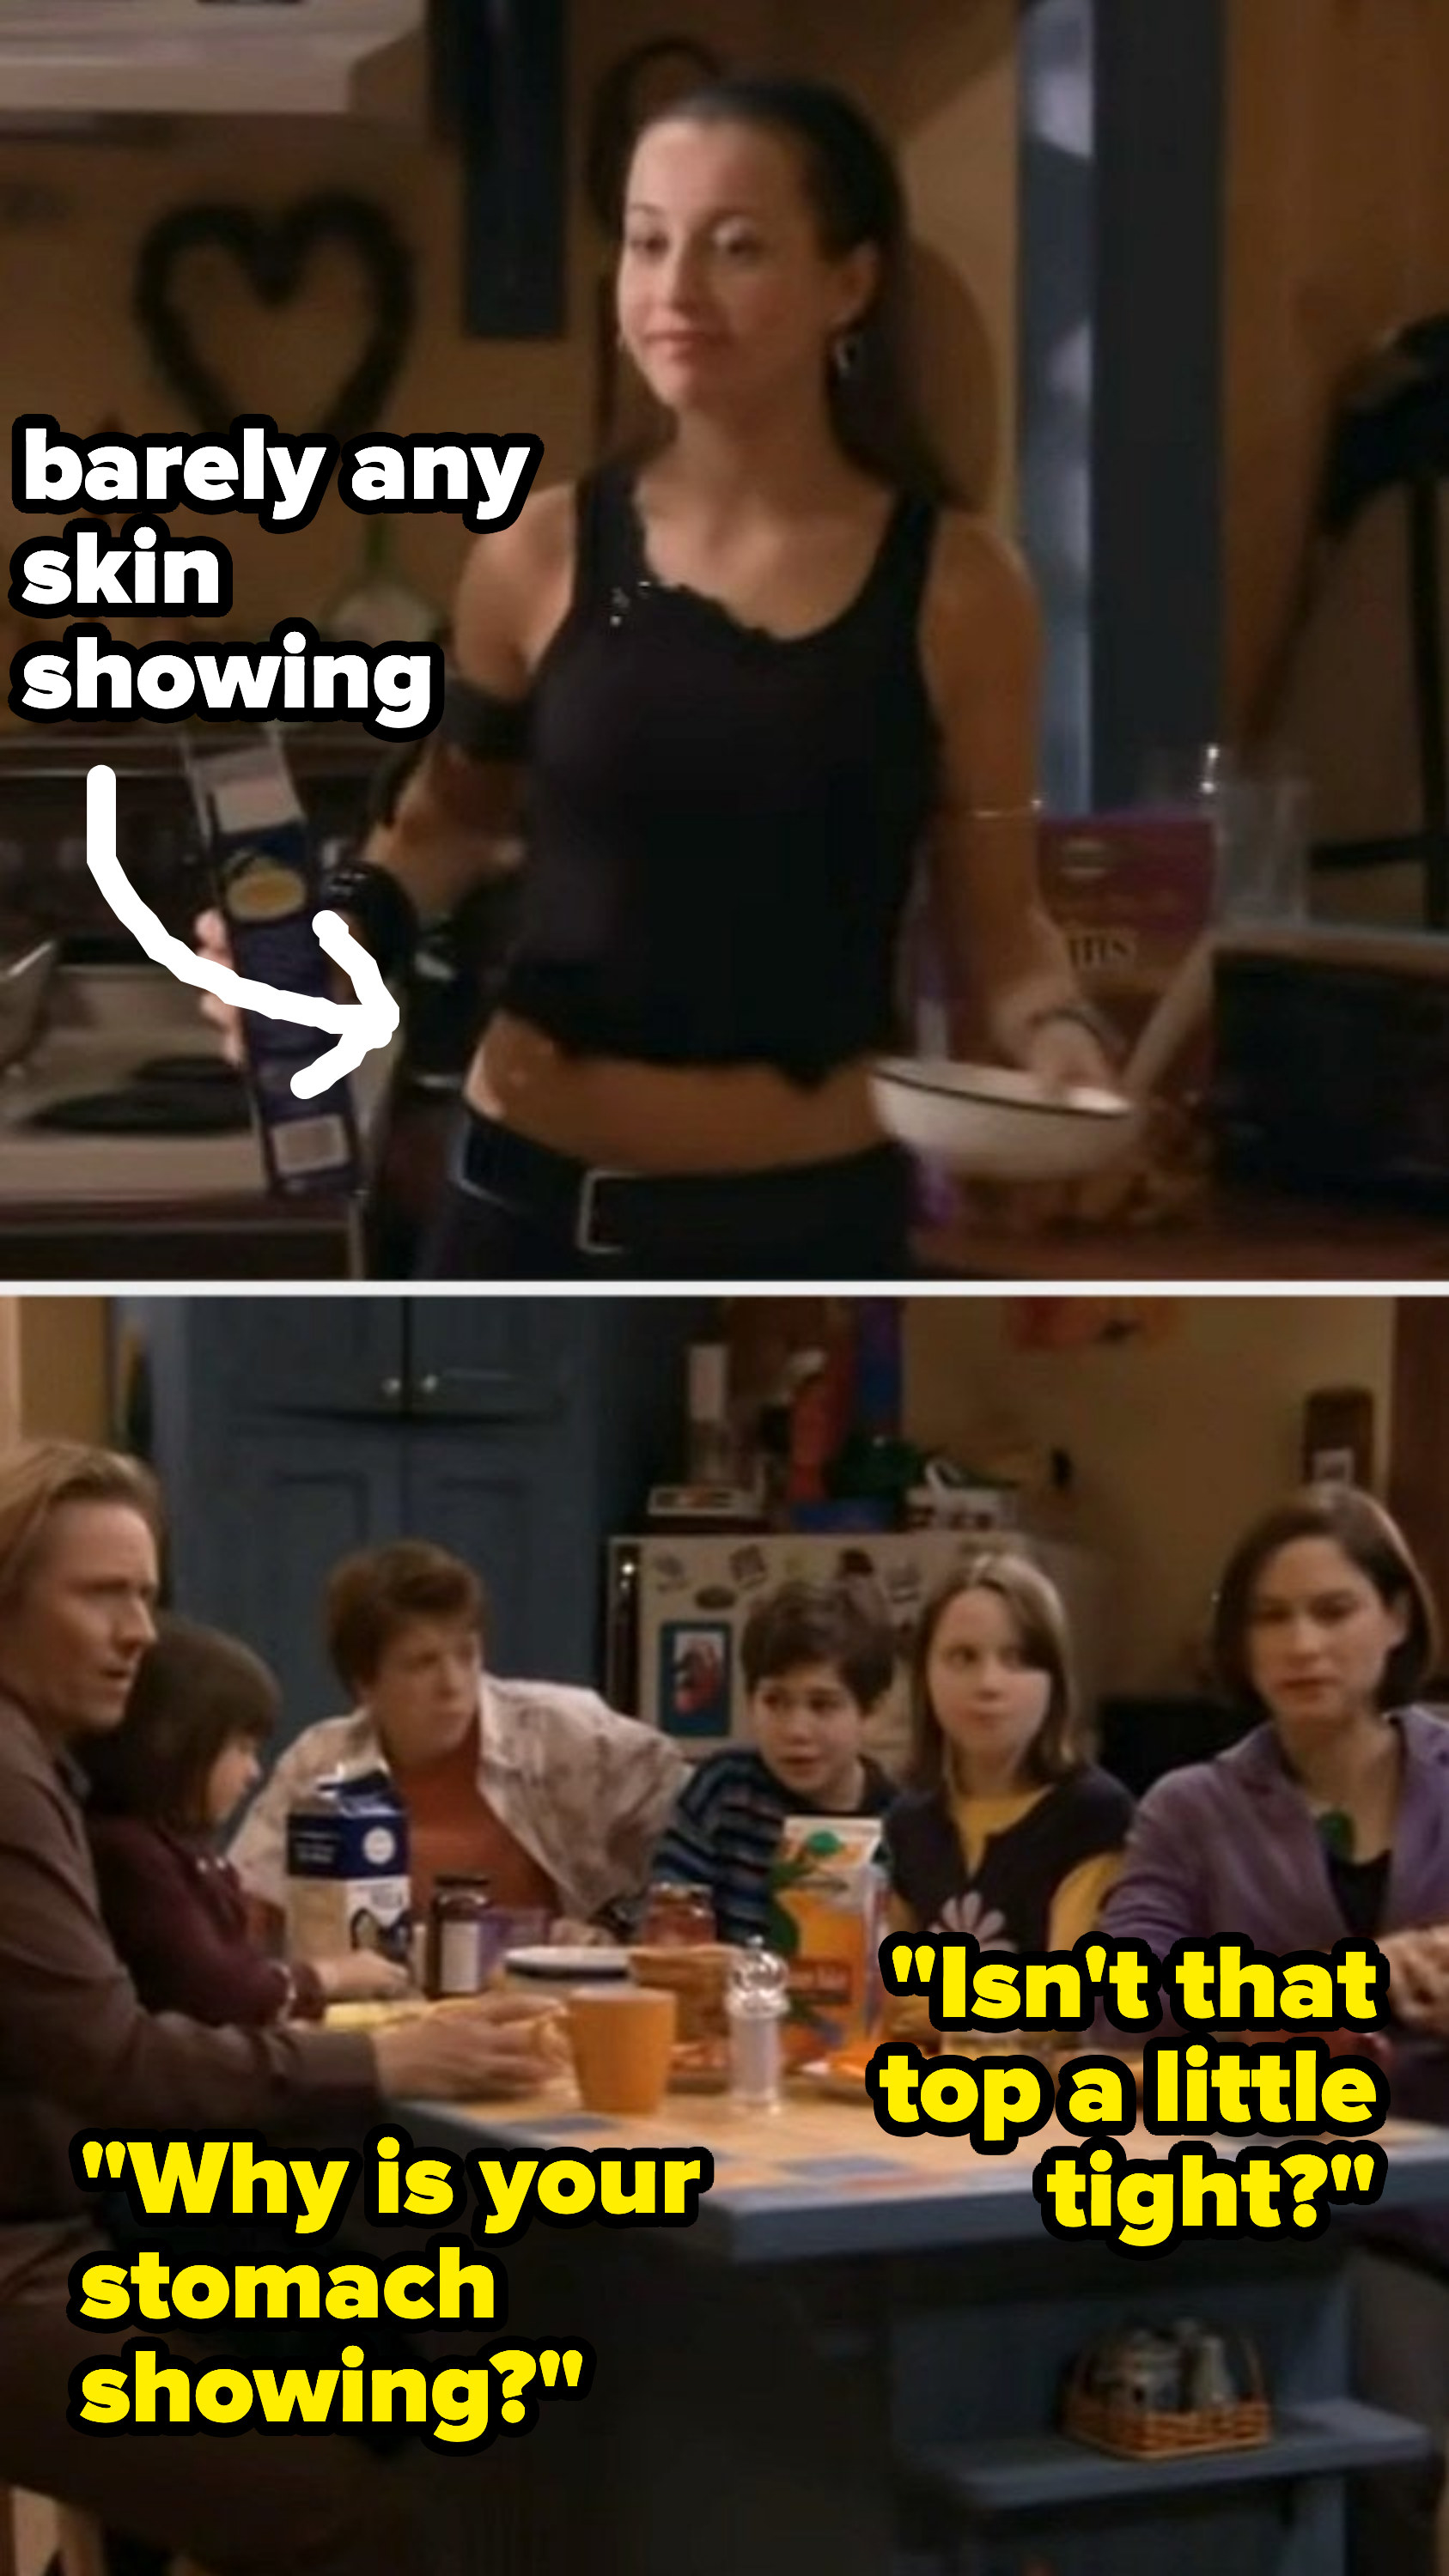 the family shocked around the dinner table as casey shows up with a tank top and tiny bit of midriff showing